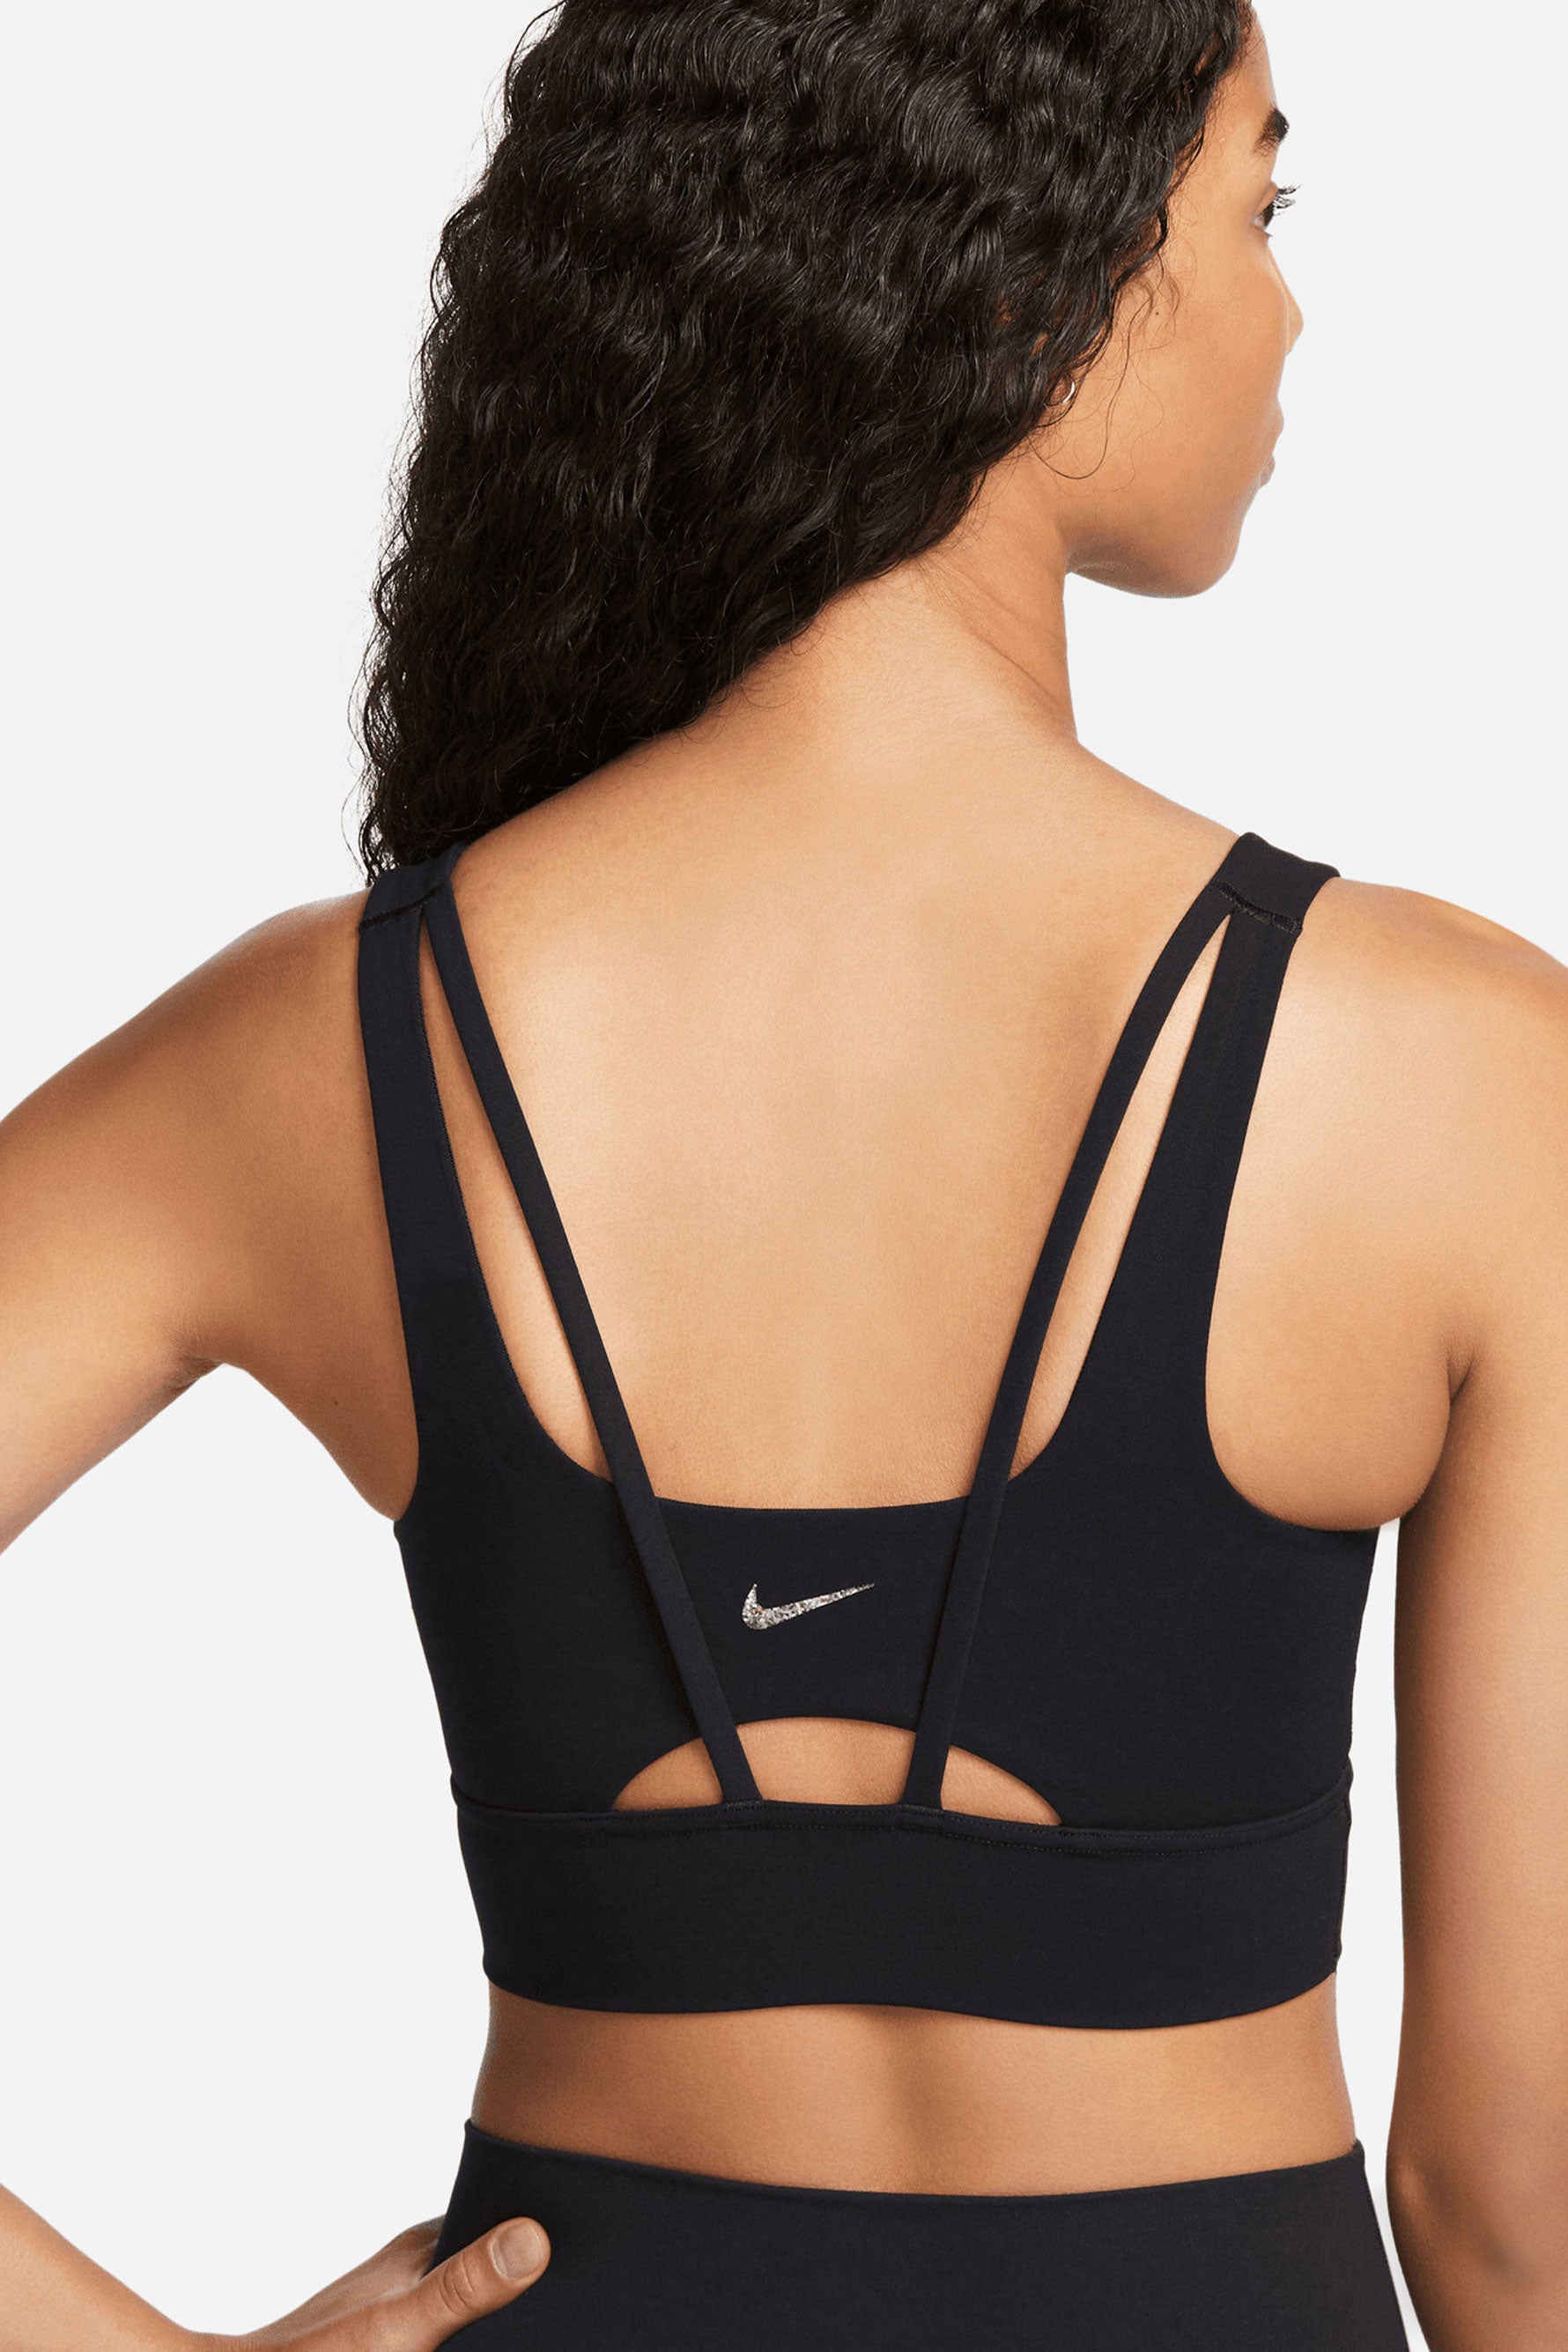 Nike Factory Store Red Nike Alate Sports Bras.